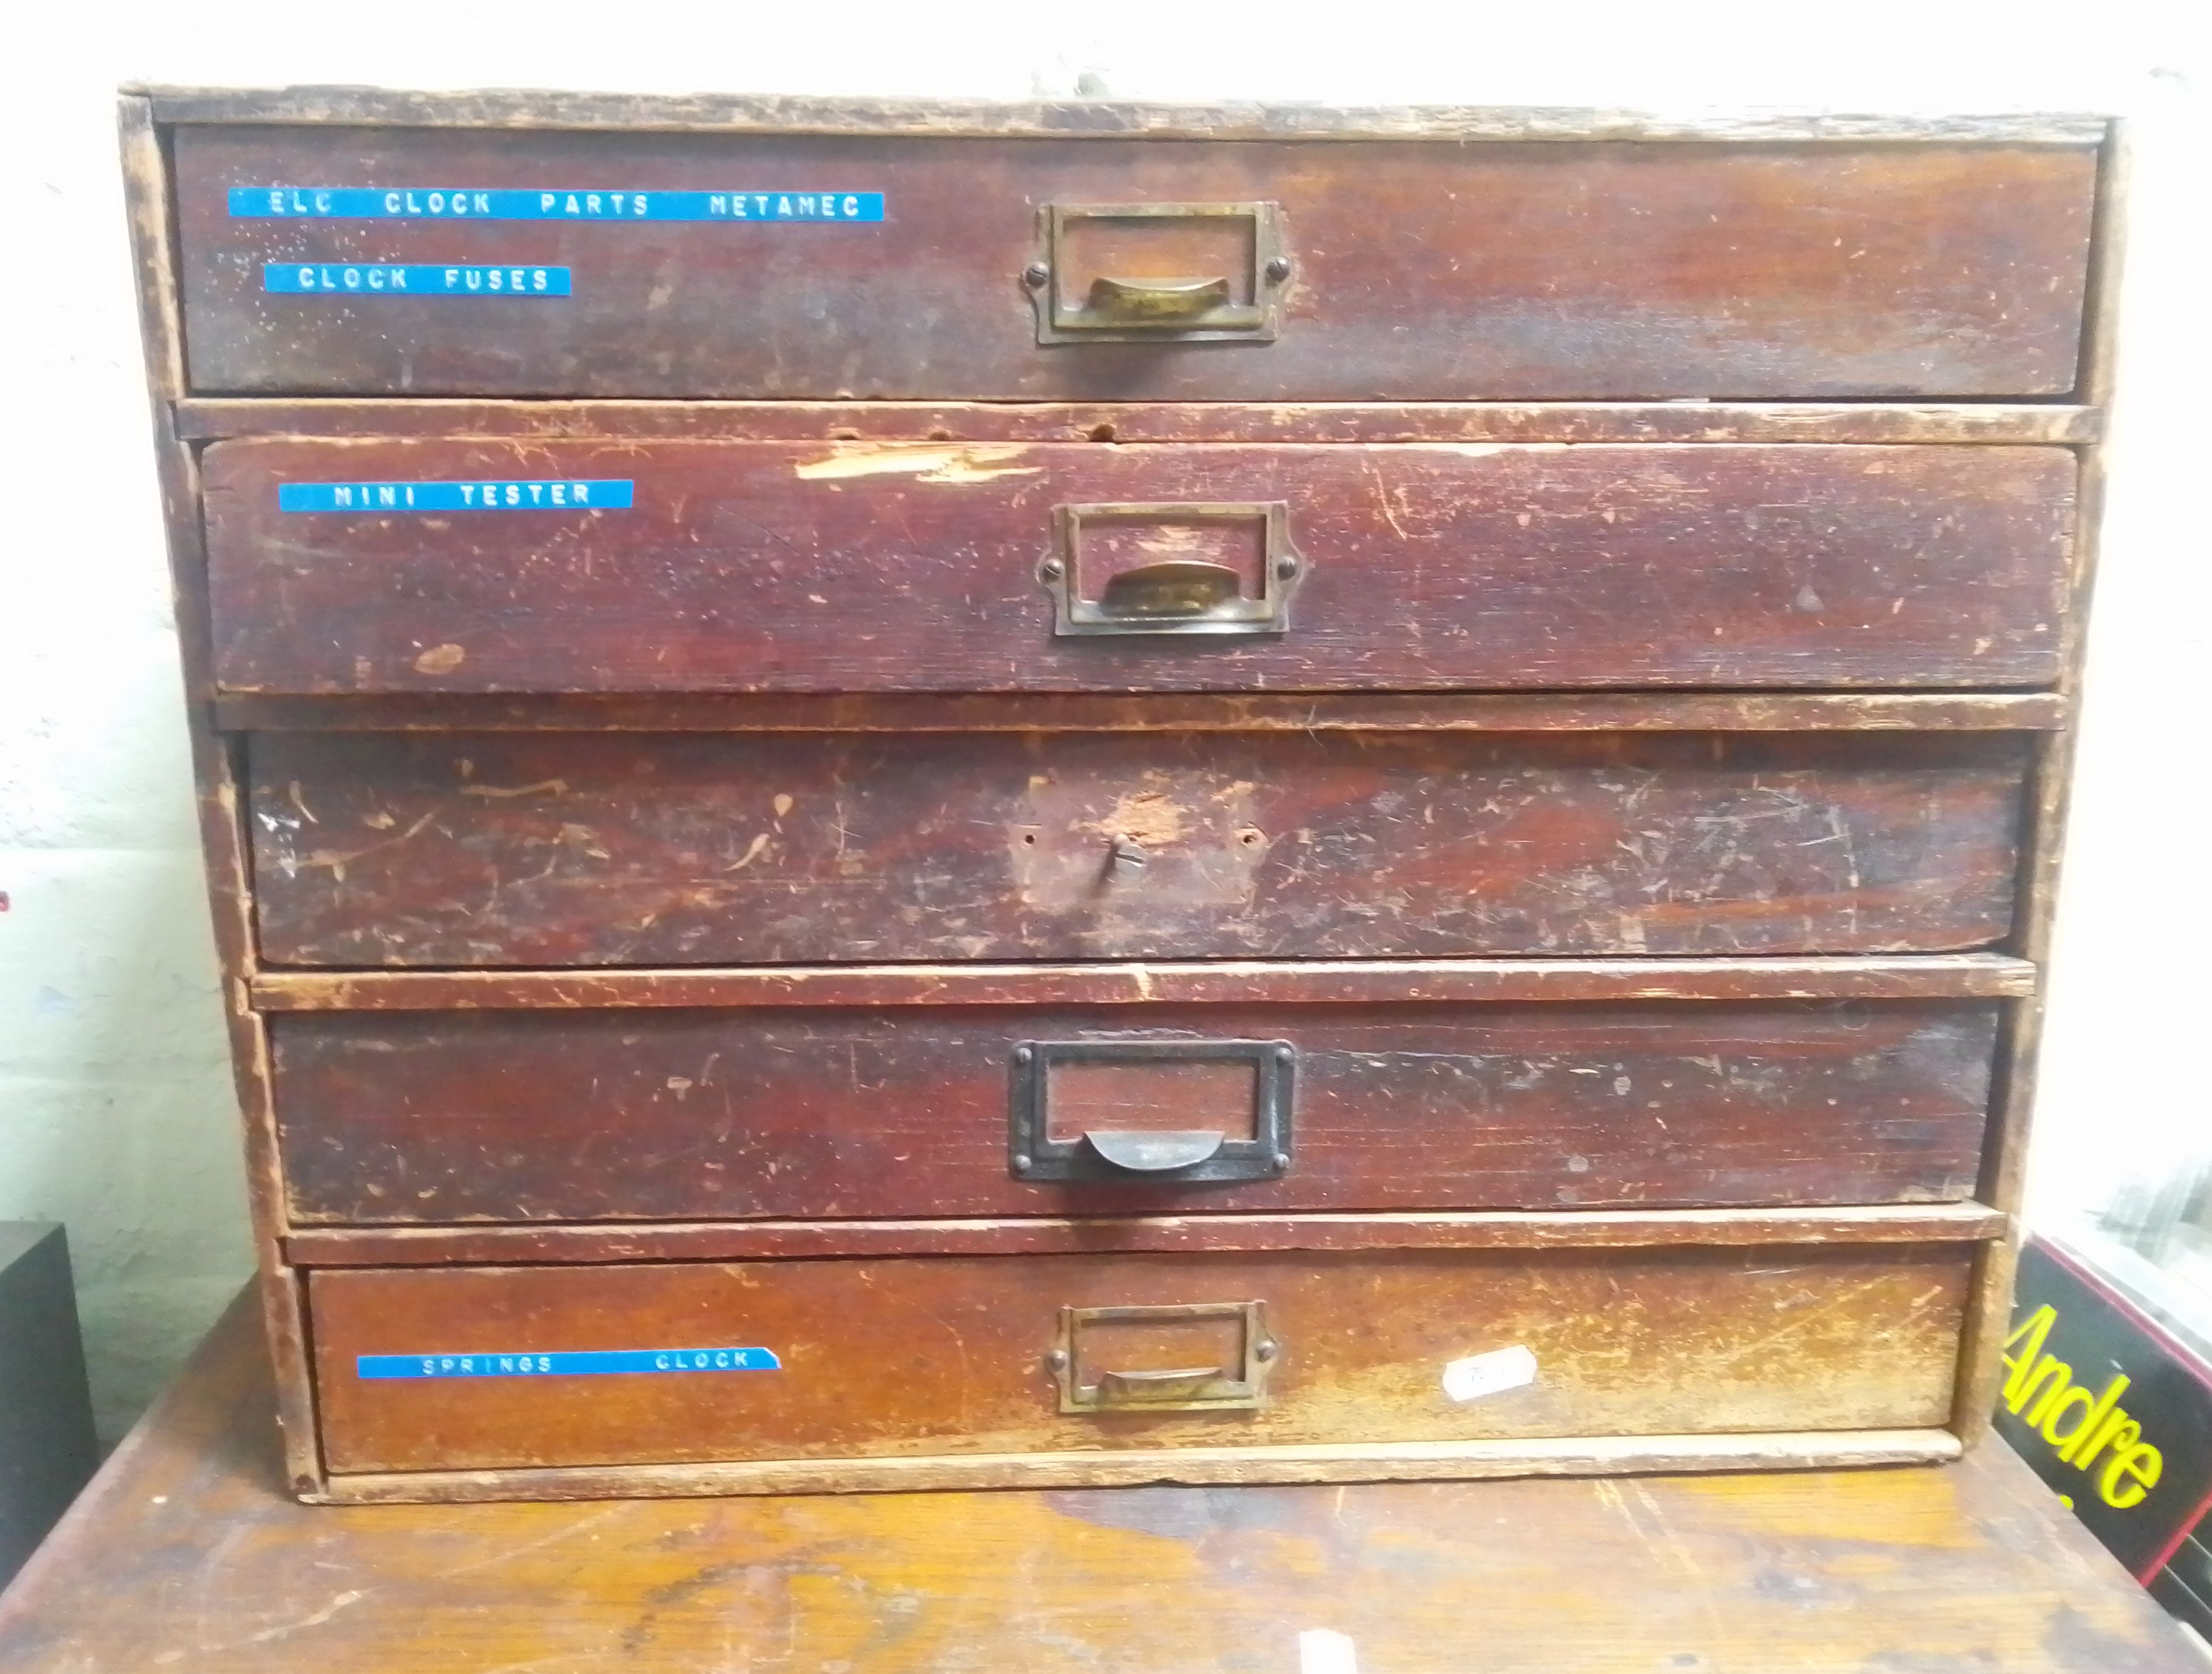 A five drawer horologist's chest and contents comprising watch and clock making spares.